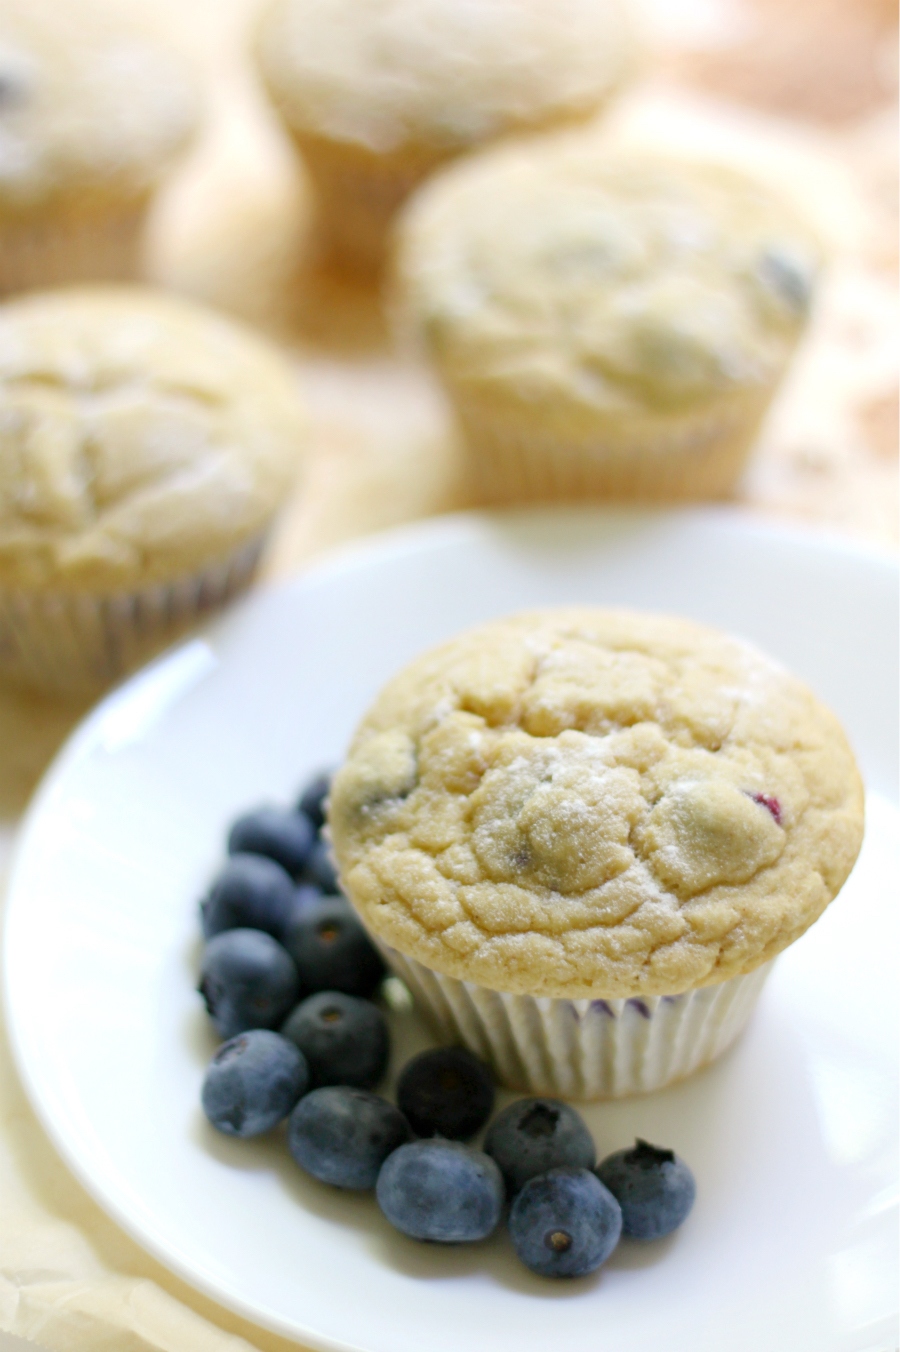 Gluten-Free Bakery-Style Blueberry Muffins (Vegan, Allergy-Free) | Strength and Sunshine @RebeccaGF666 A healthy, big, fluffy, muffin recipe bursting with fresh blueberries! Gluten-Free Bakery-Style Blueberry Muffins that are vegan and allergy-free too! A loved bakeshop classic, now enjoyable for all at breakfast or brunch, with a cup of coffee or tea!